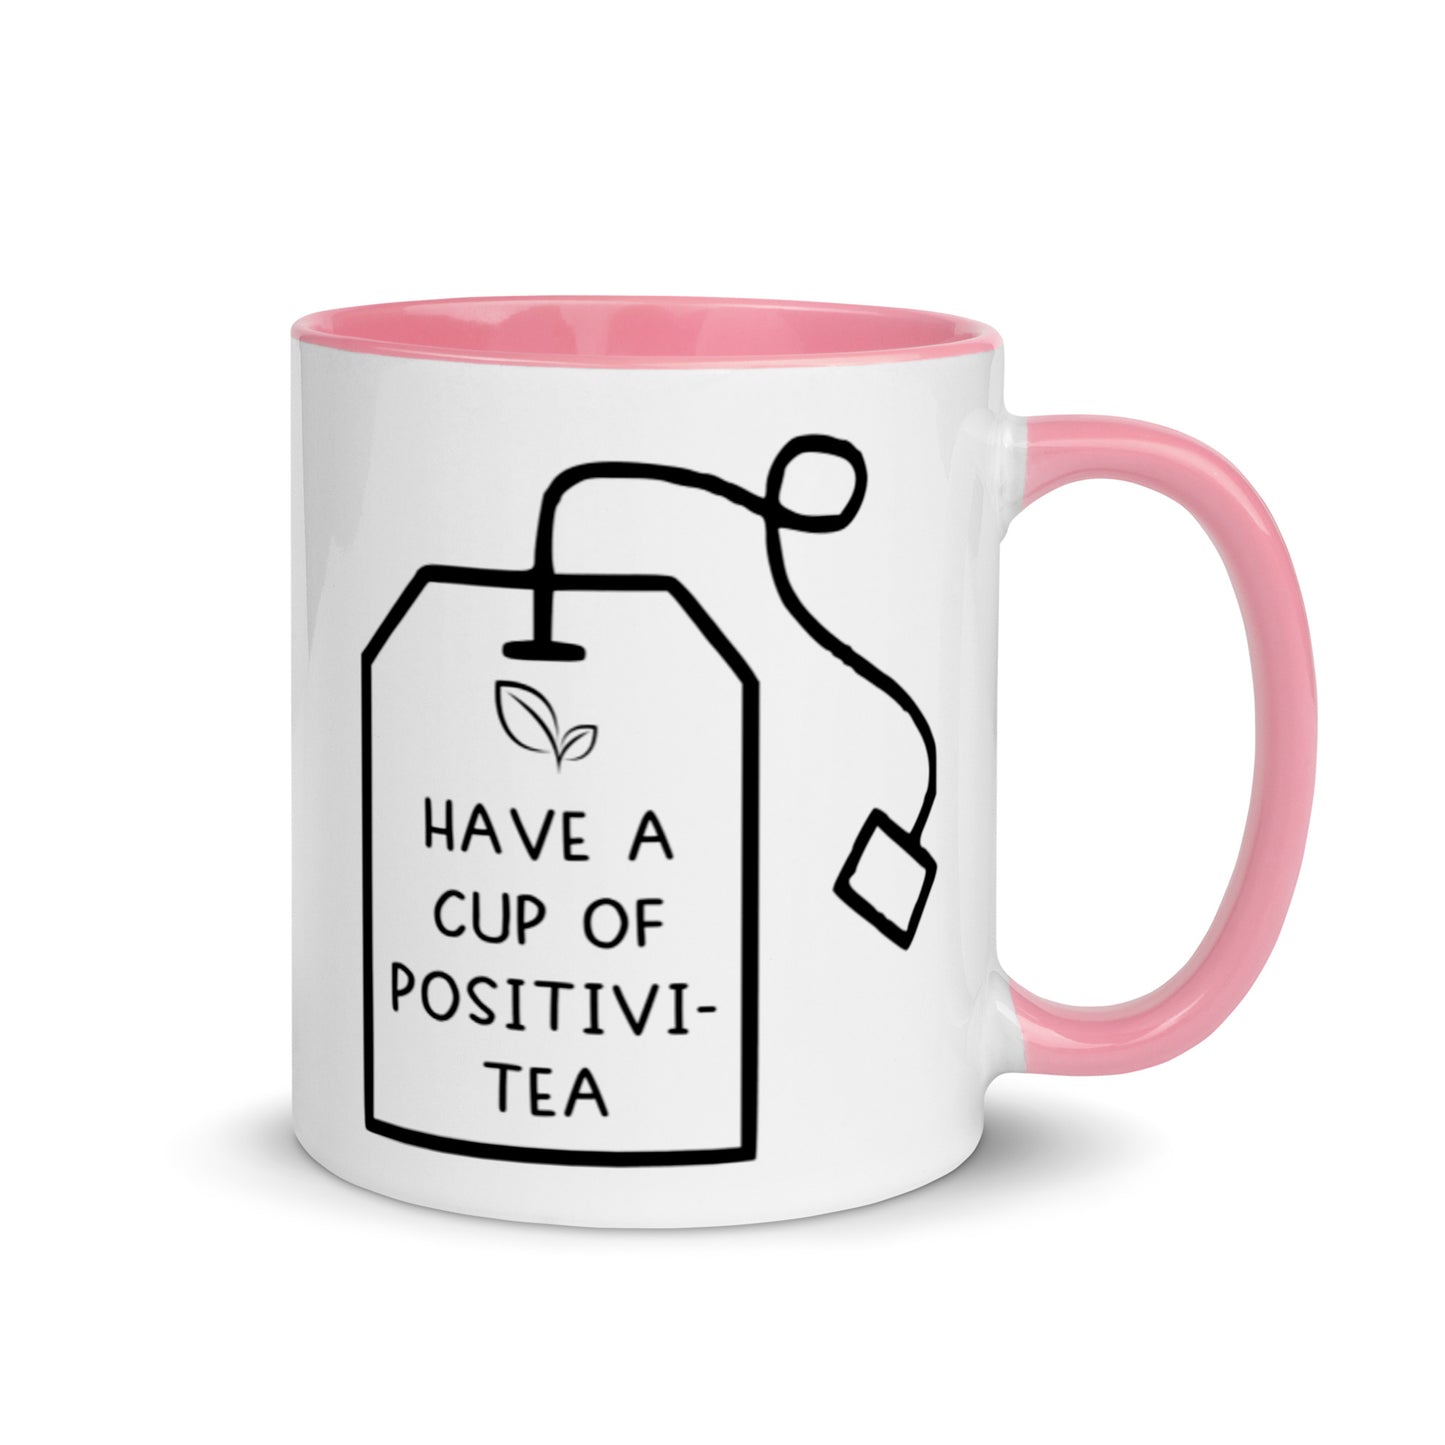 Have a Cup of Positivi-Tea Mug, pink and handle